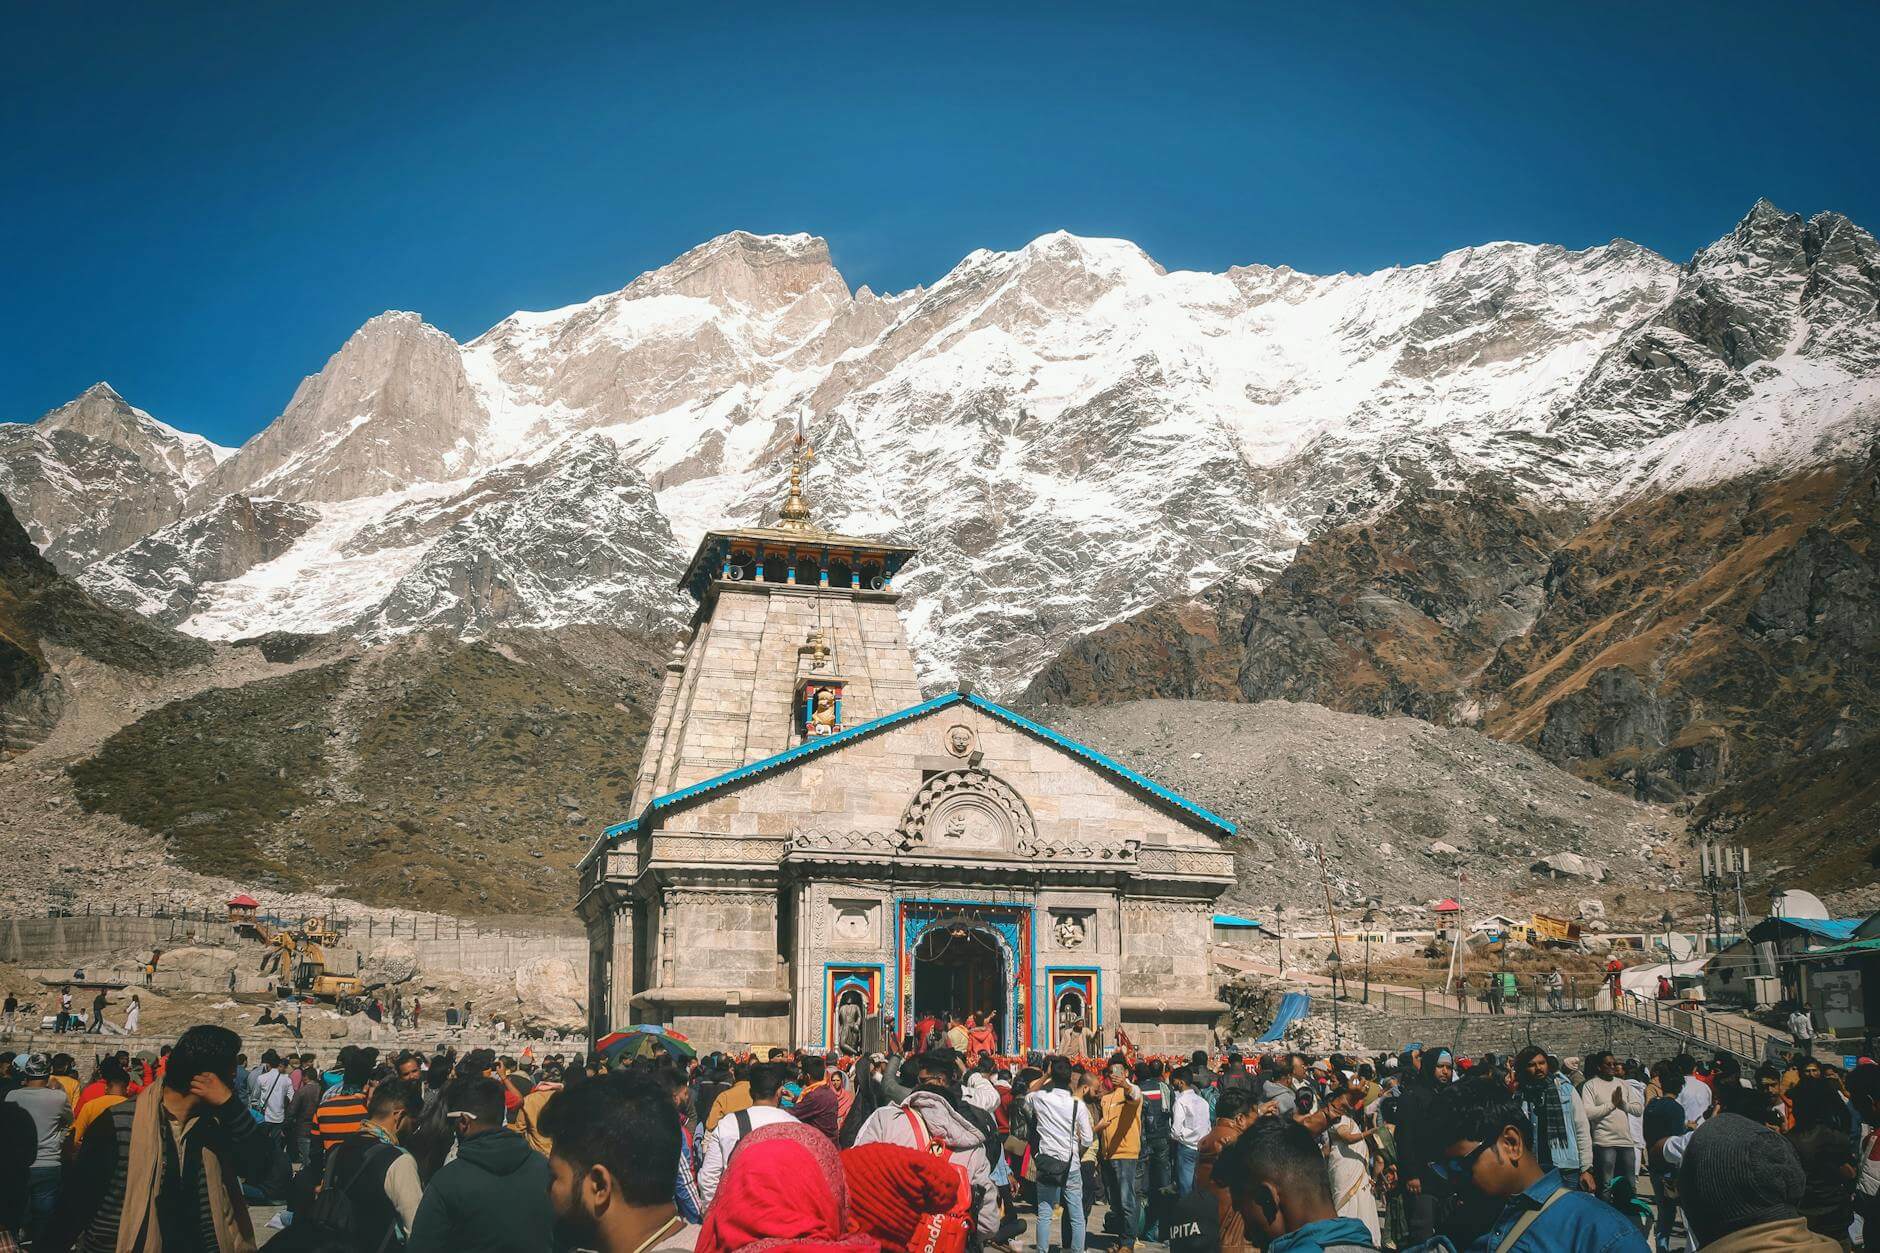 crowds of people by a mountain temple